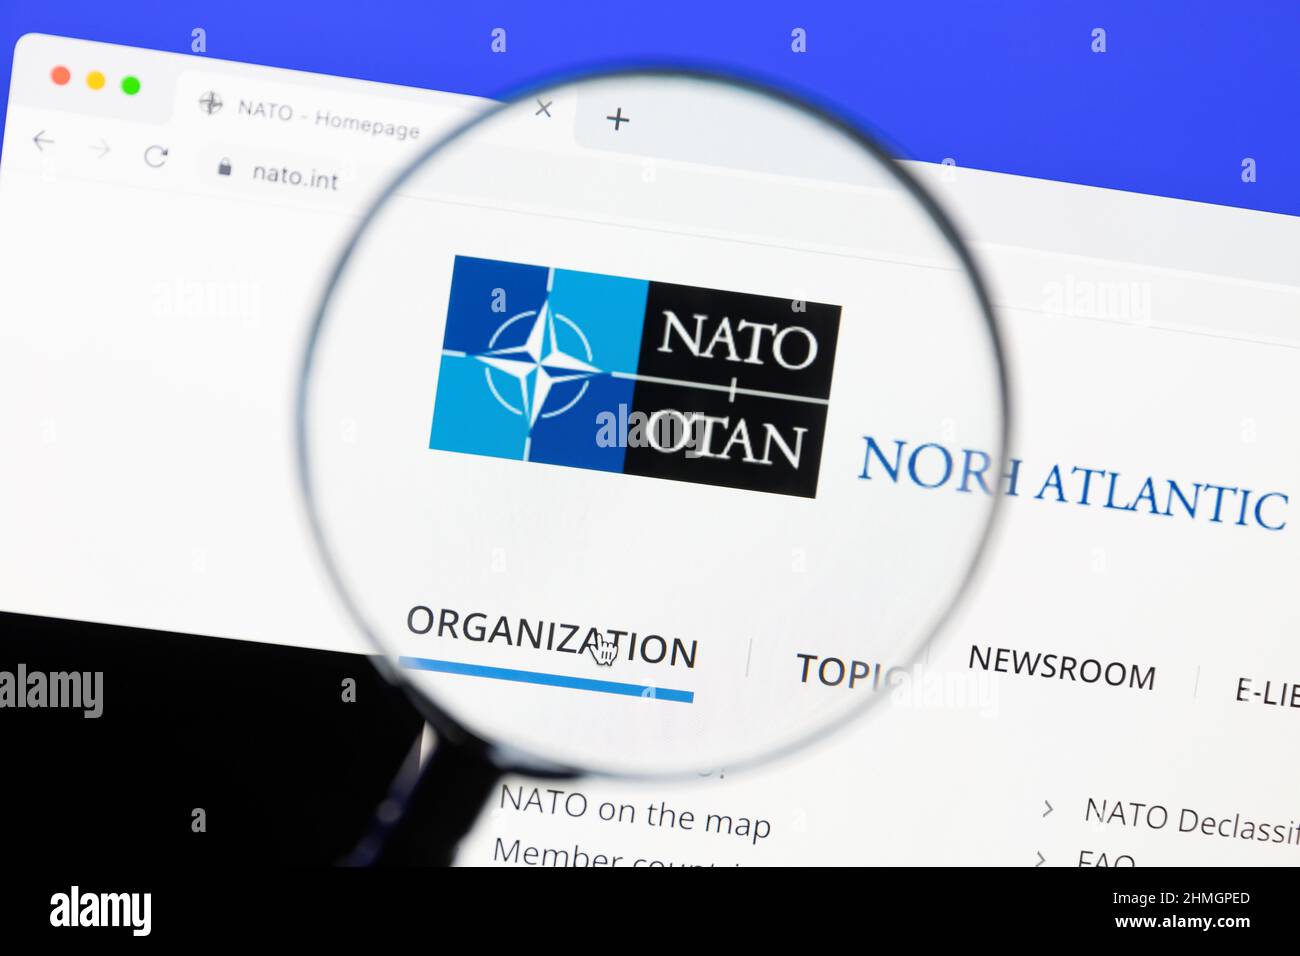 Ostersund, Sweden - Jan 23, 2022: NATO website under a magnifying glass. NATO is an intergovernmental military alliance. Stock Photo